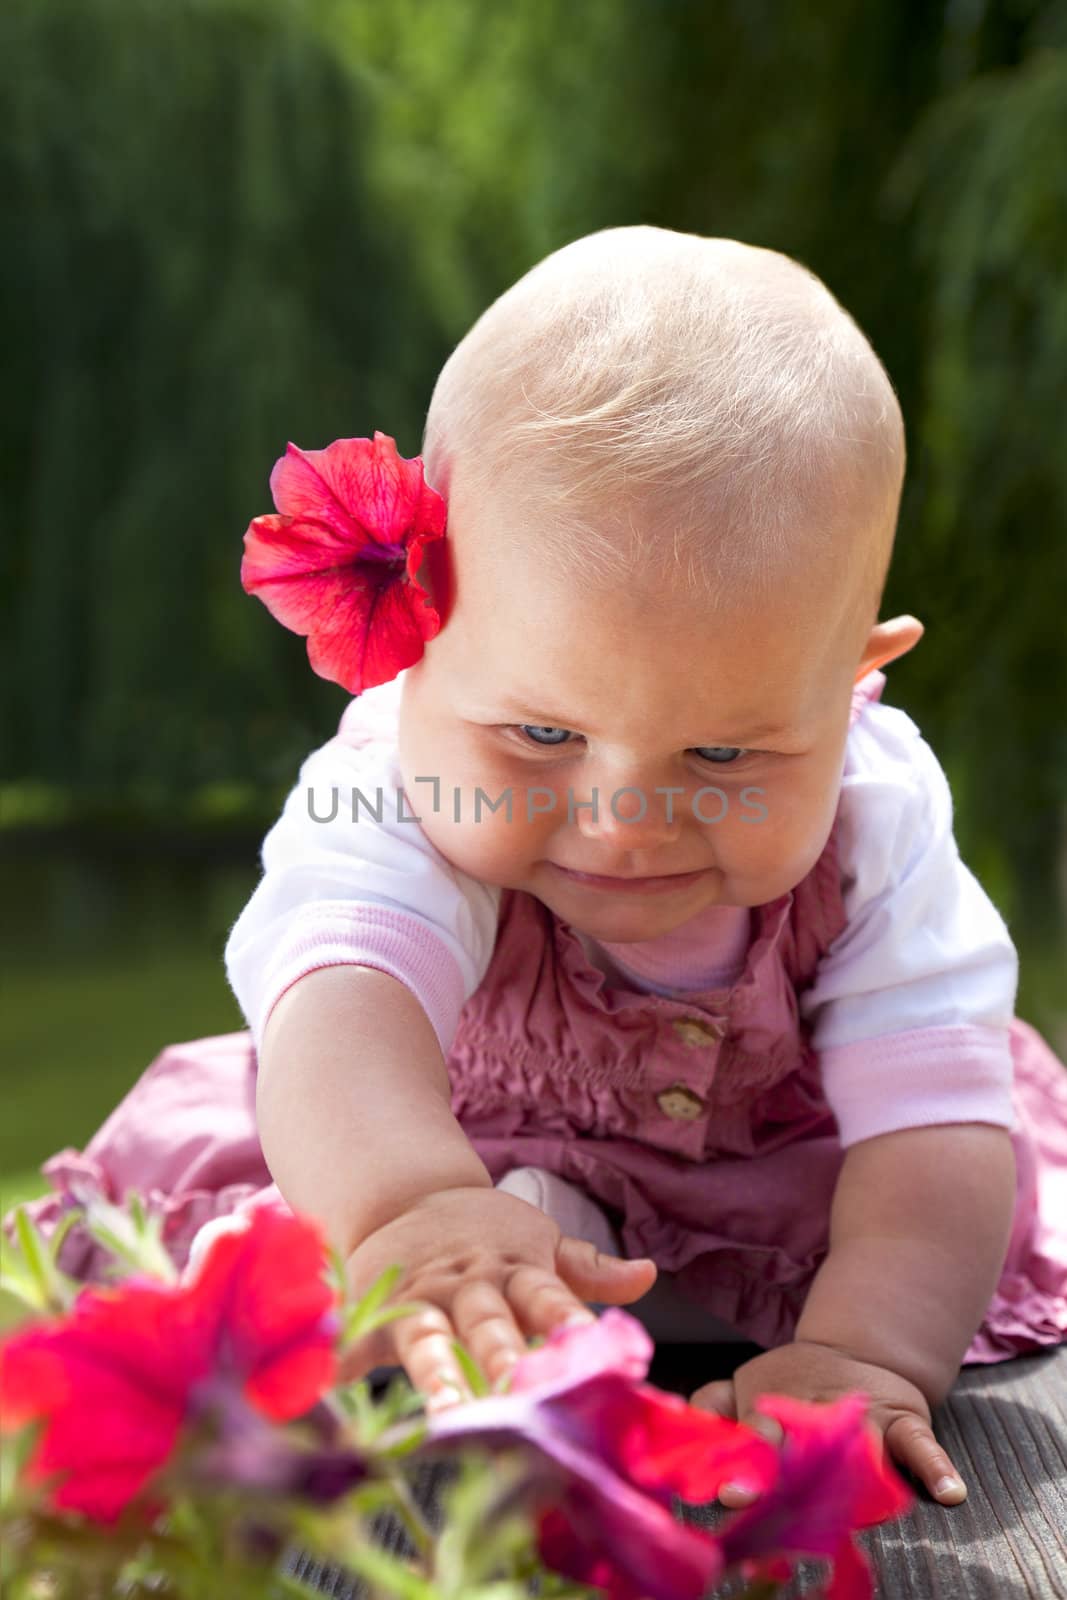 Sweet little baby girl sitting with red flower behind ear